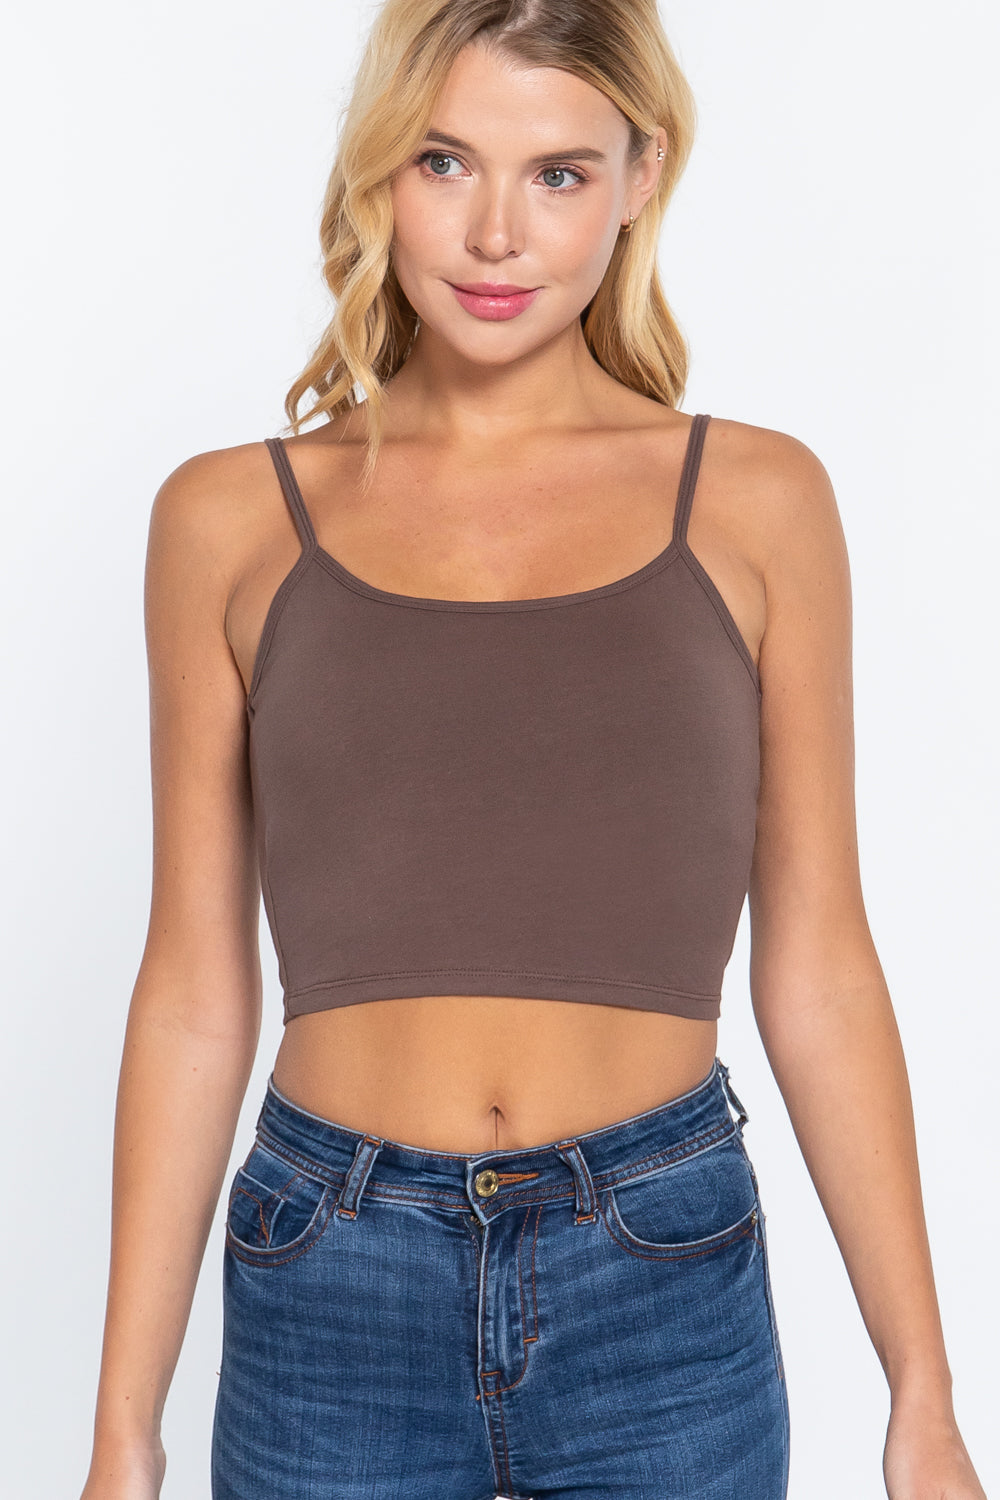 Round Neck W/removable Bra Cup Cotton Spandex Bra Wood Brown Top Shirts & Tops jehouze 